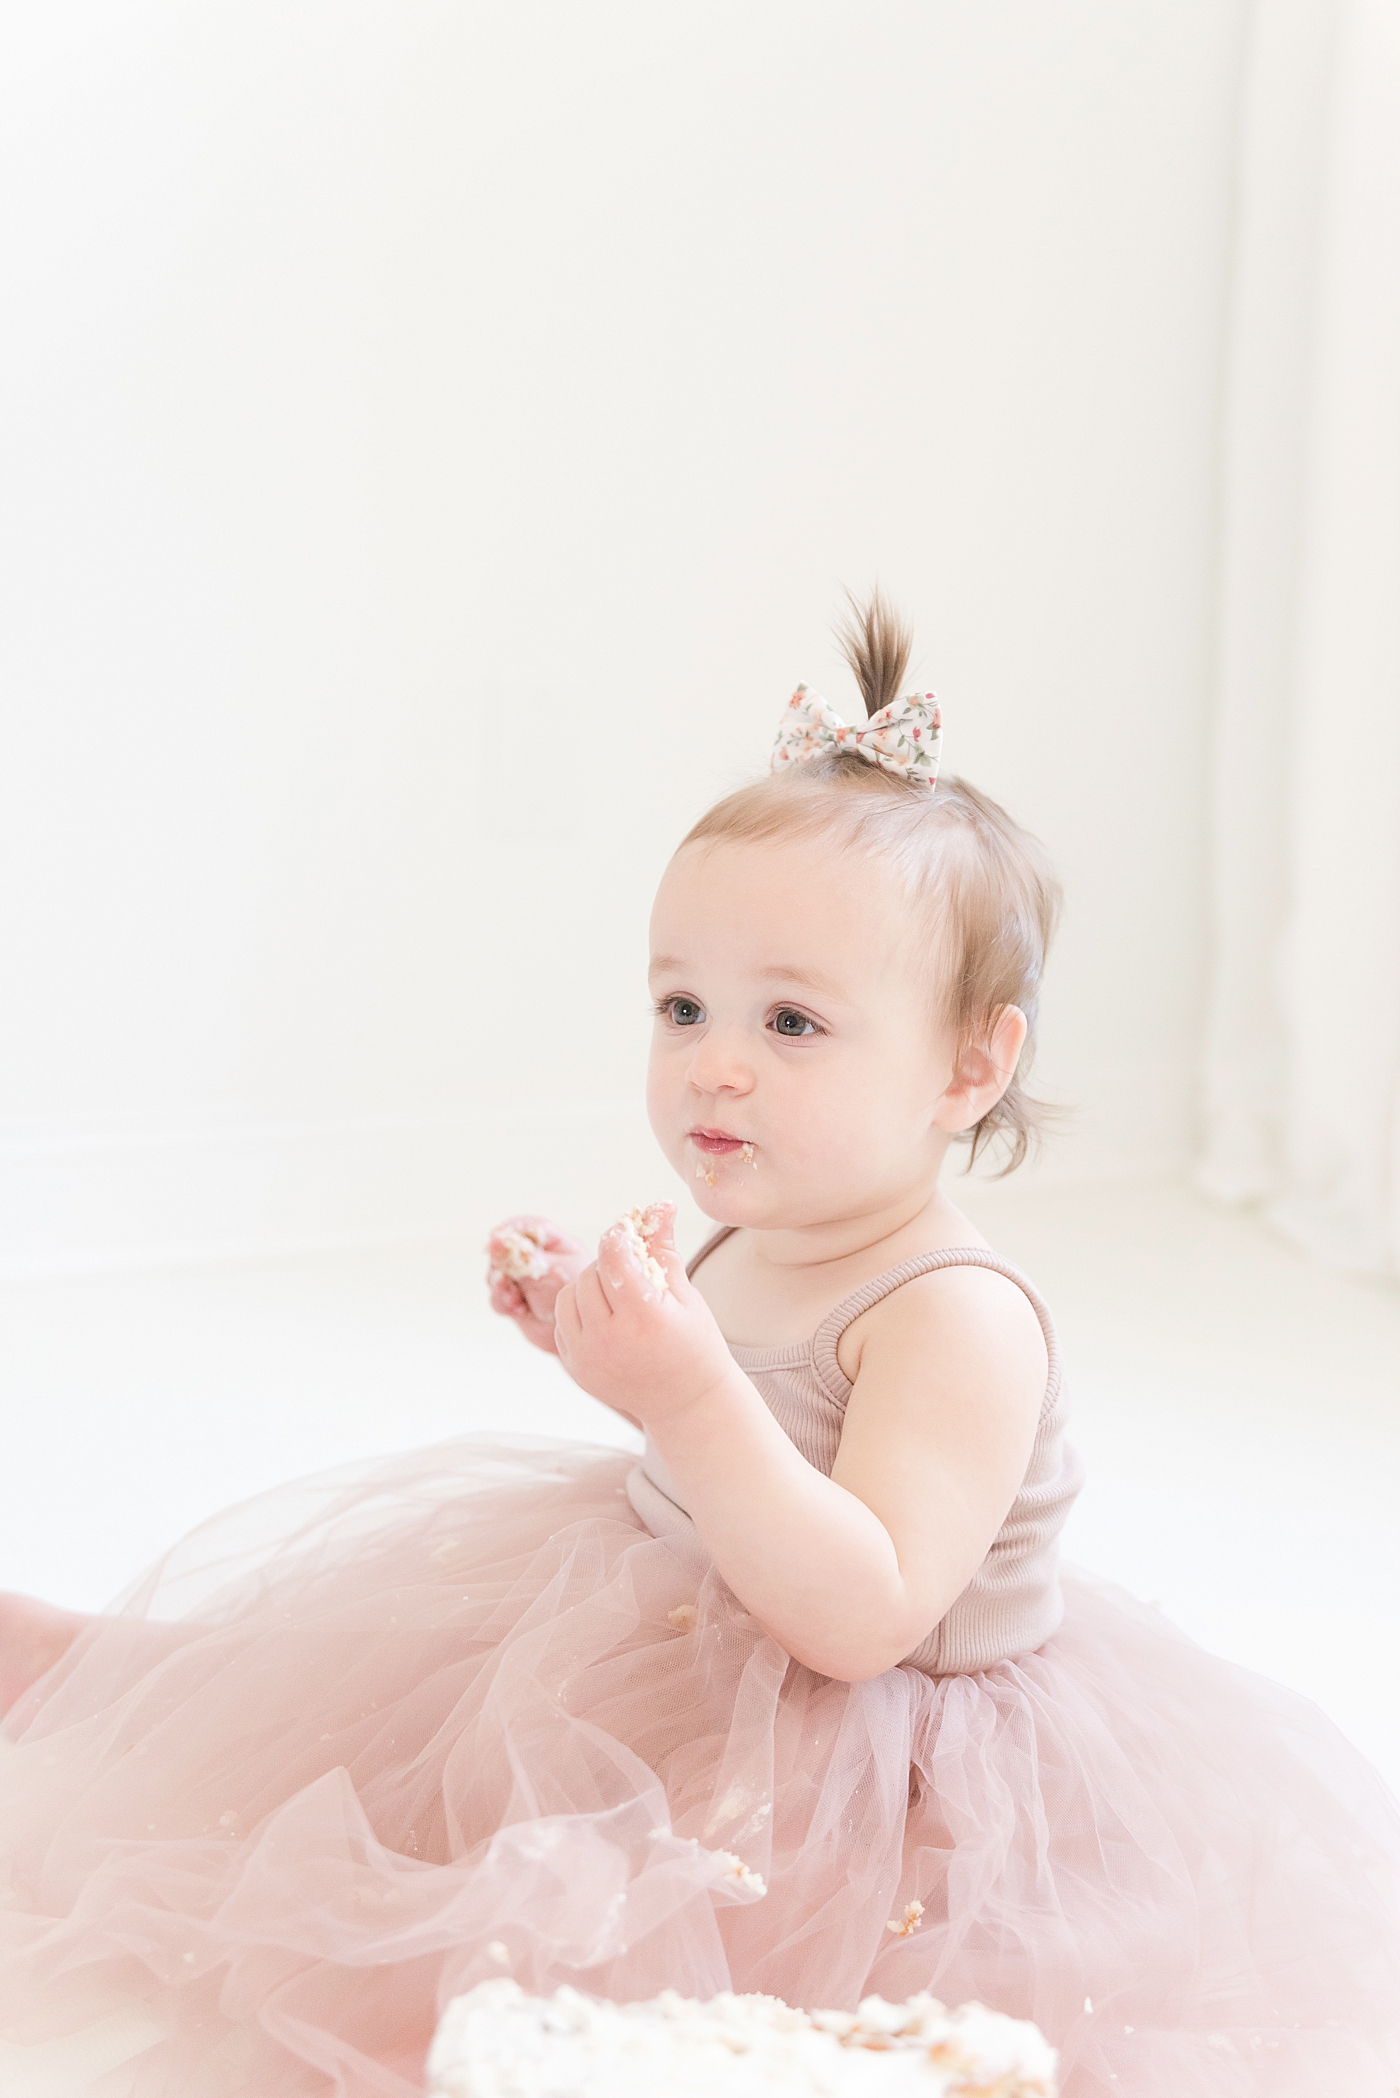 Baby girl in pink tutu eating cake | Baby photographer in Charlotte Anna Wisjo